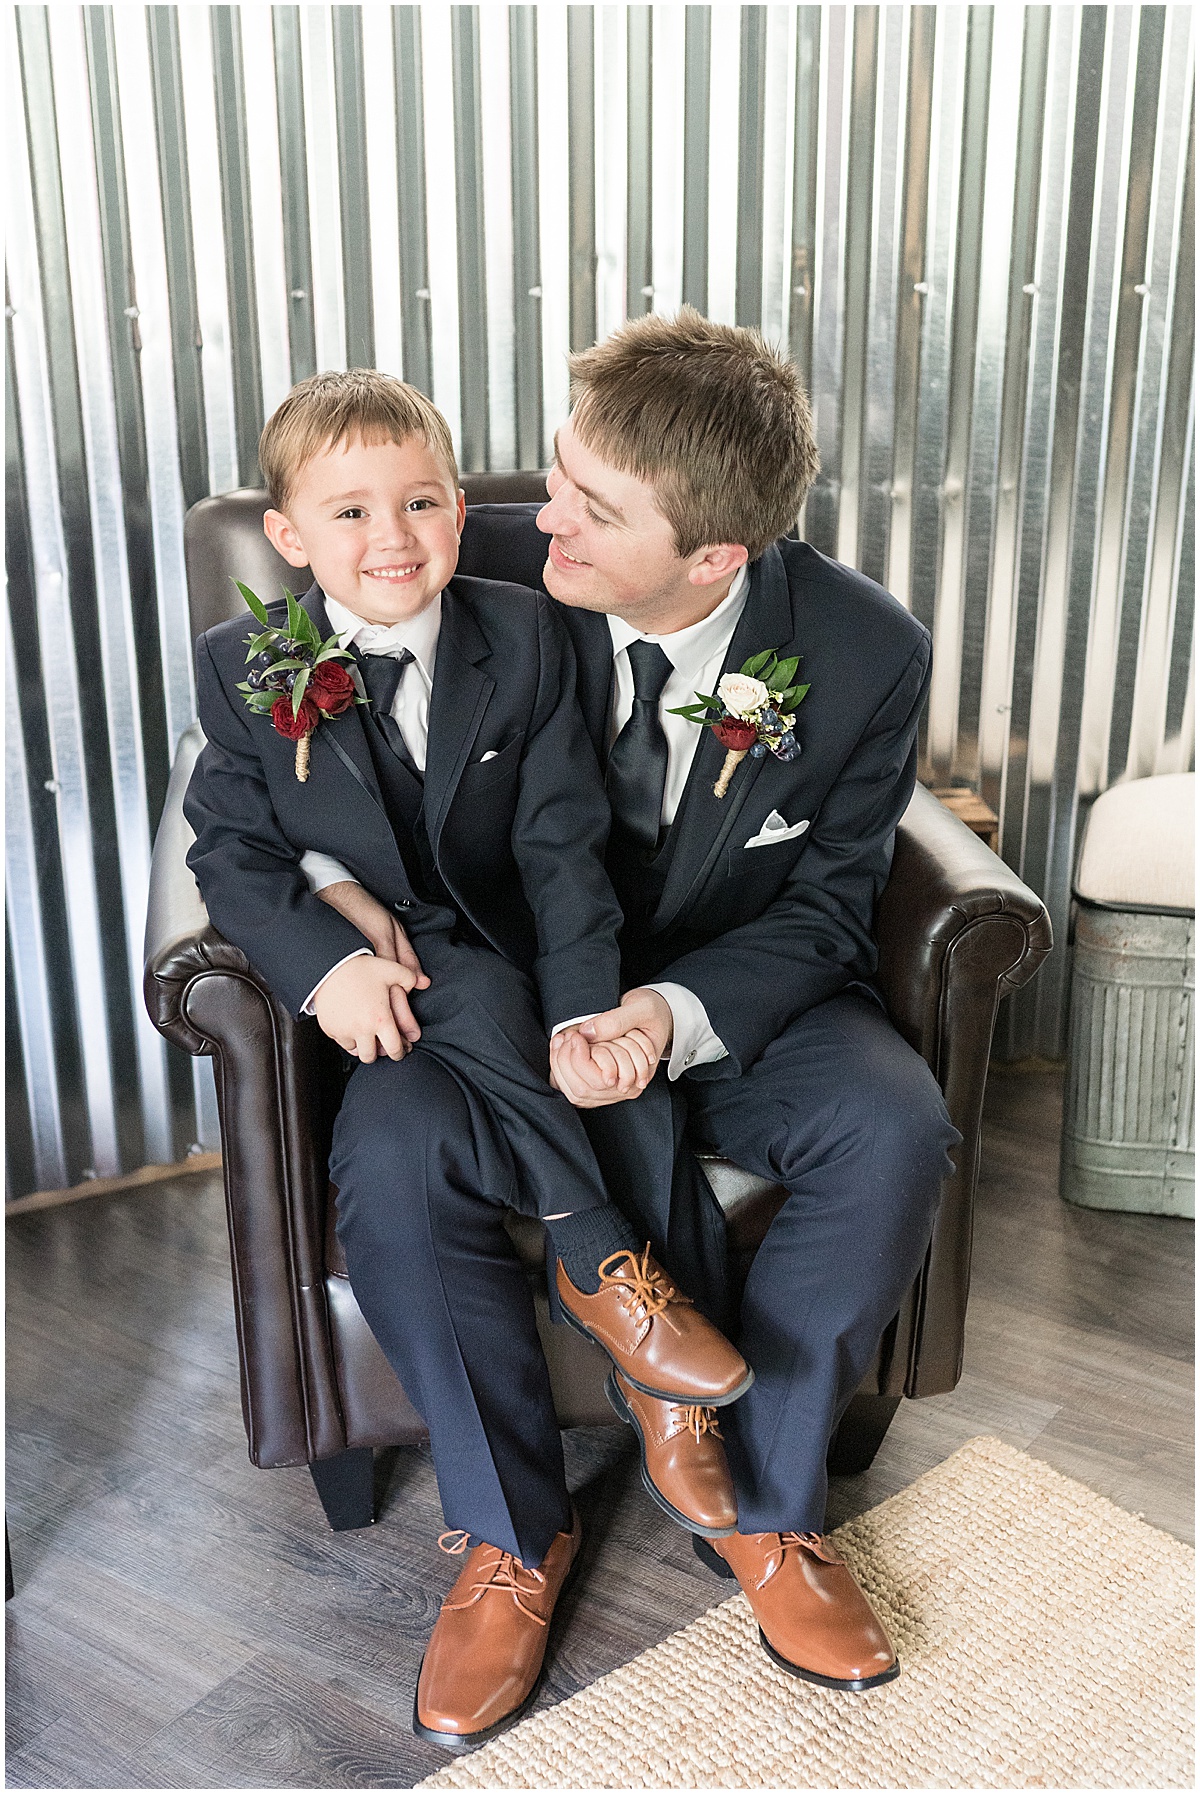 Groom portraits before fall wedding at Vintage Oaks Banquet Barn in Delphi, Indiana